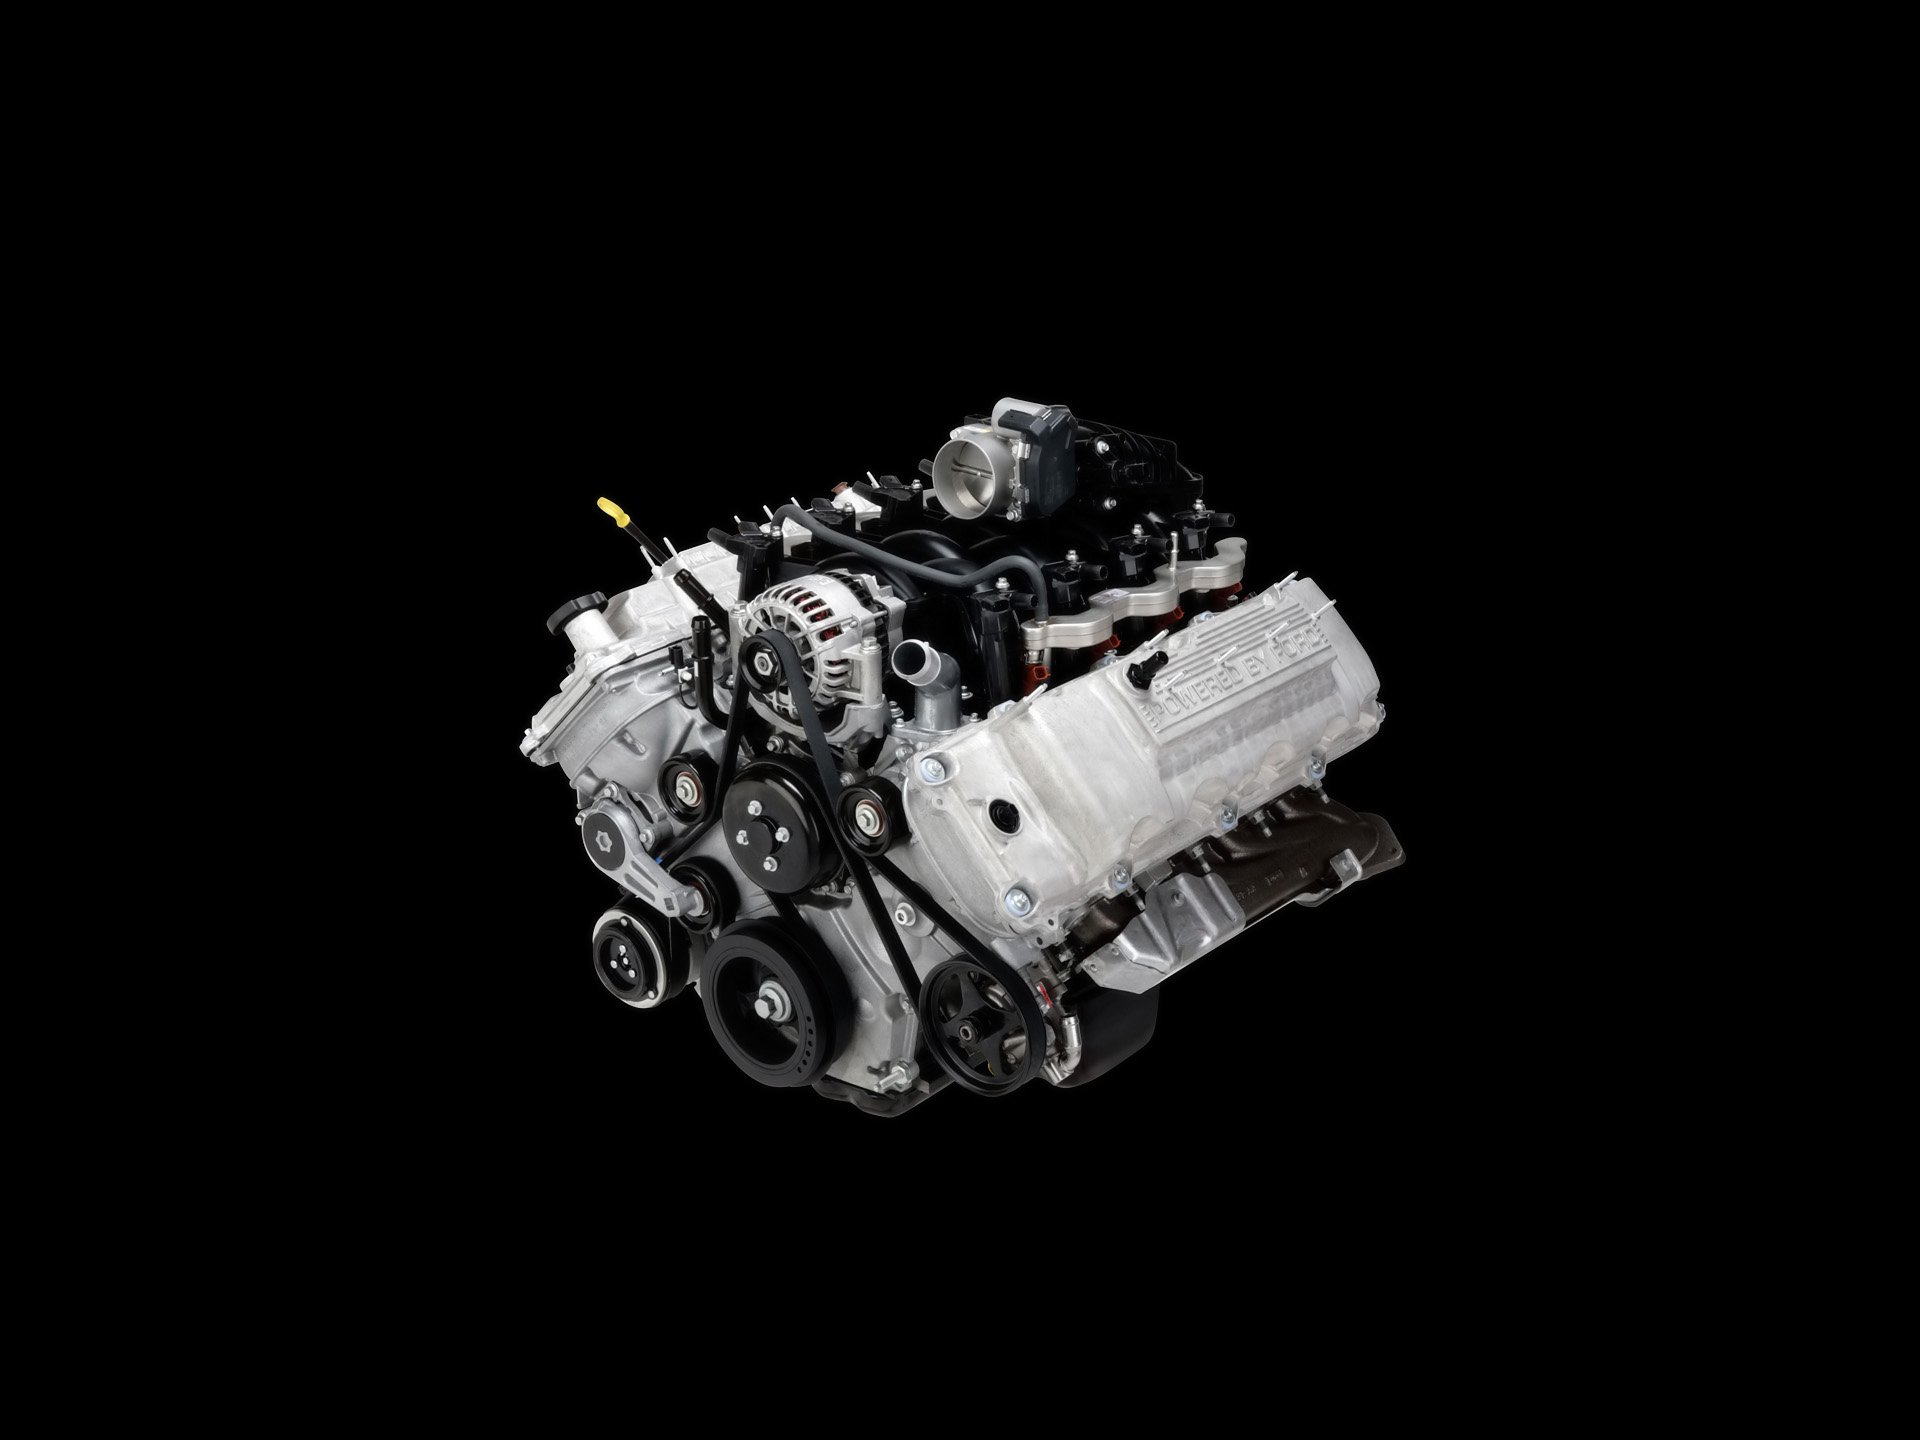 Ford F Series Engine Wallpaper. Ford F Series Engine